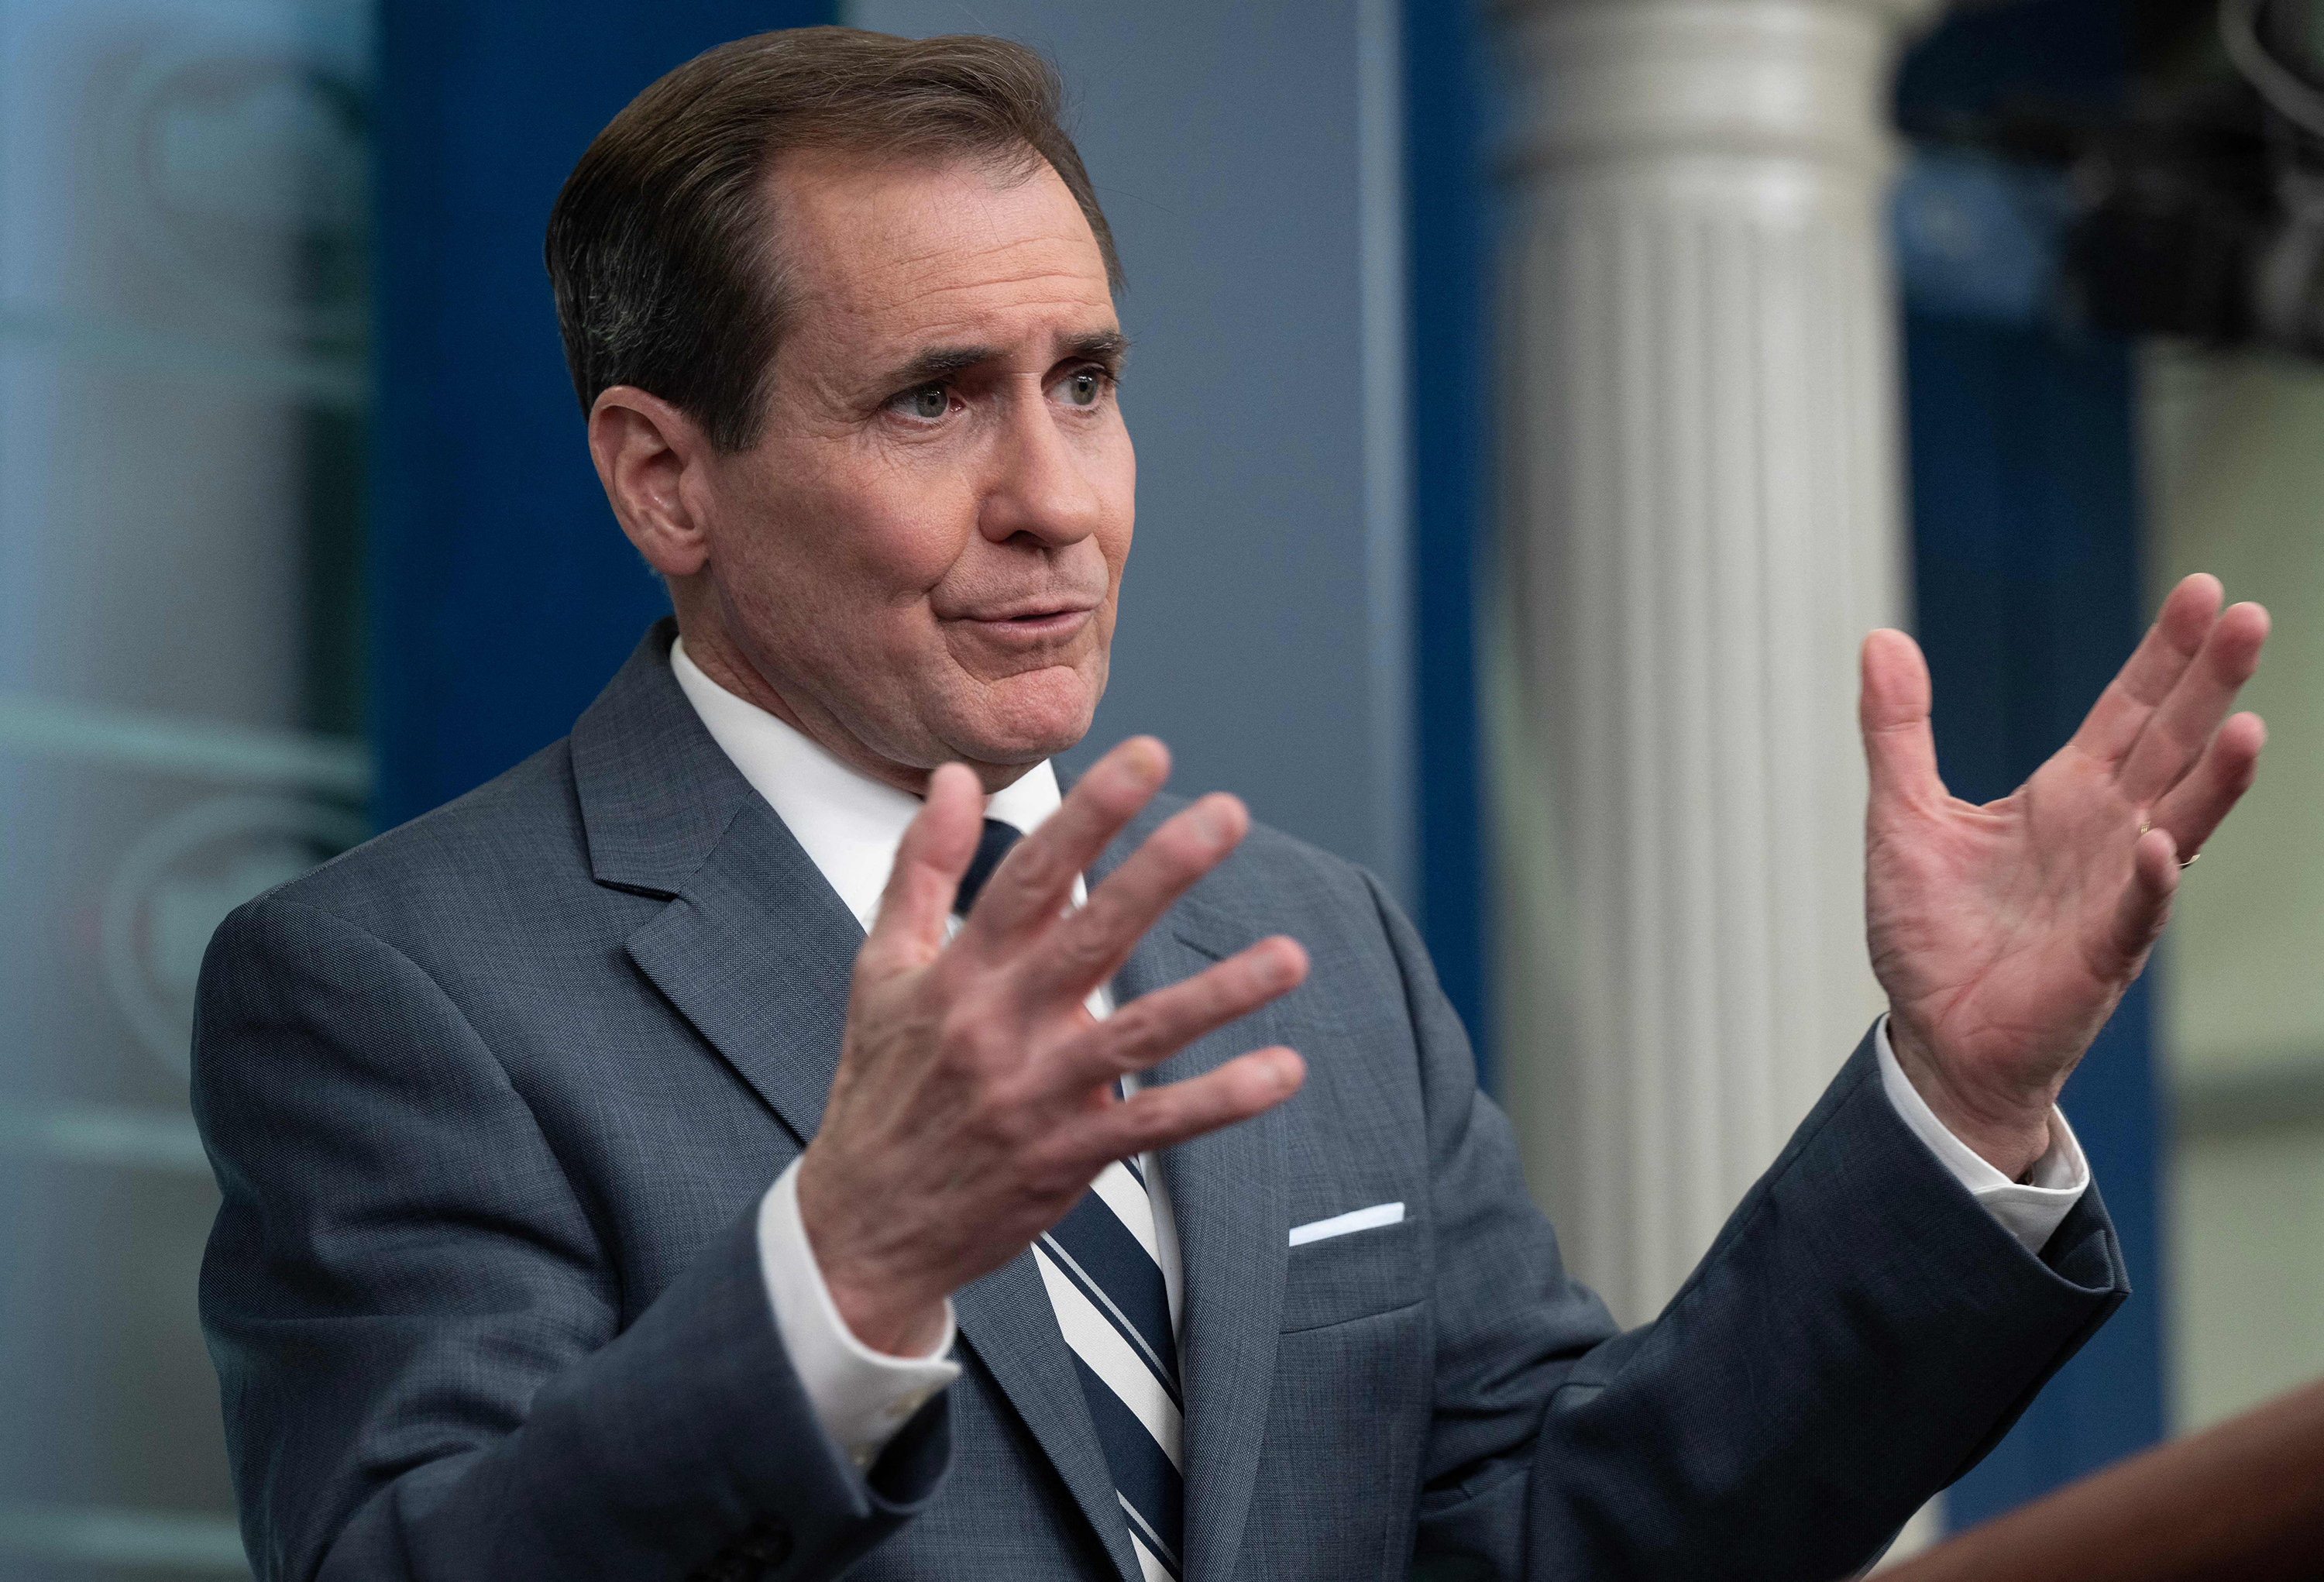 US National Security Council Coordinator for Strategic Communications John Kirby speaks during the daily press briefing in Washington, DC, on March 2.